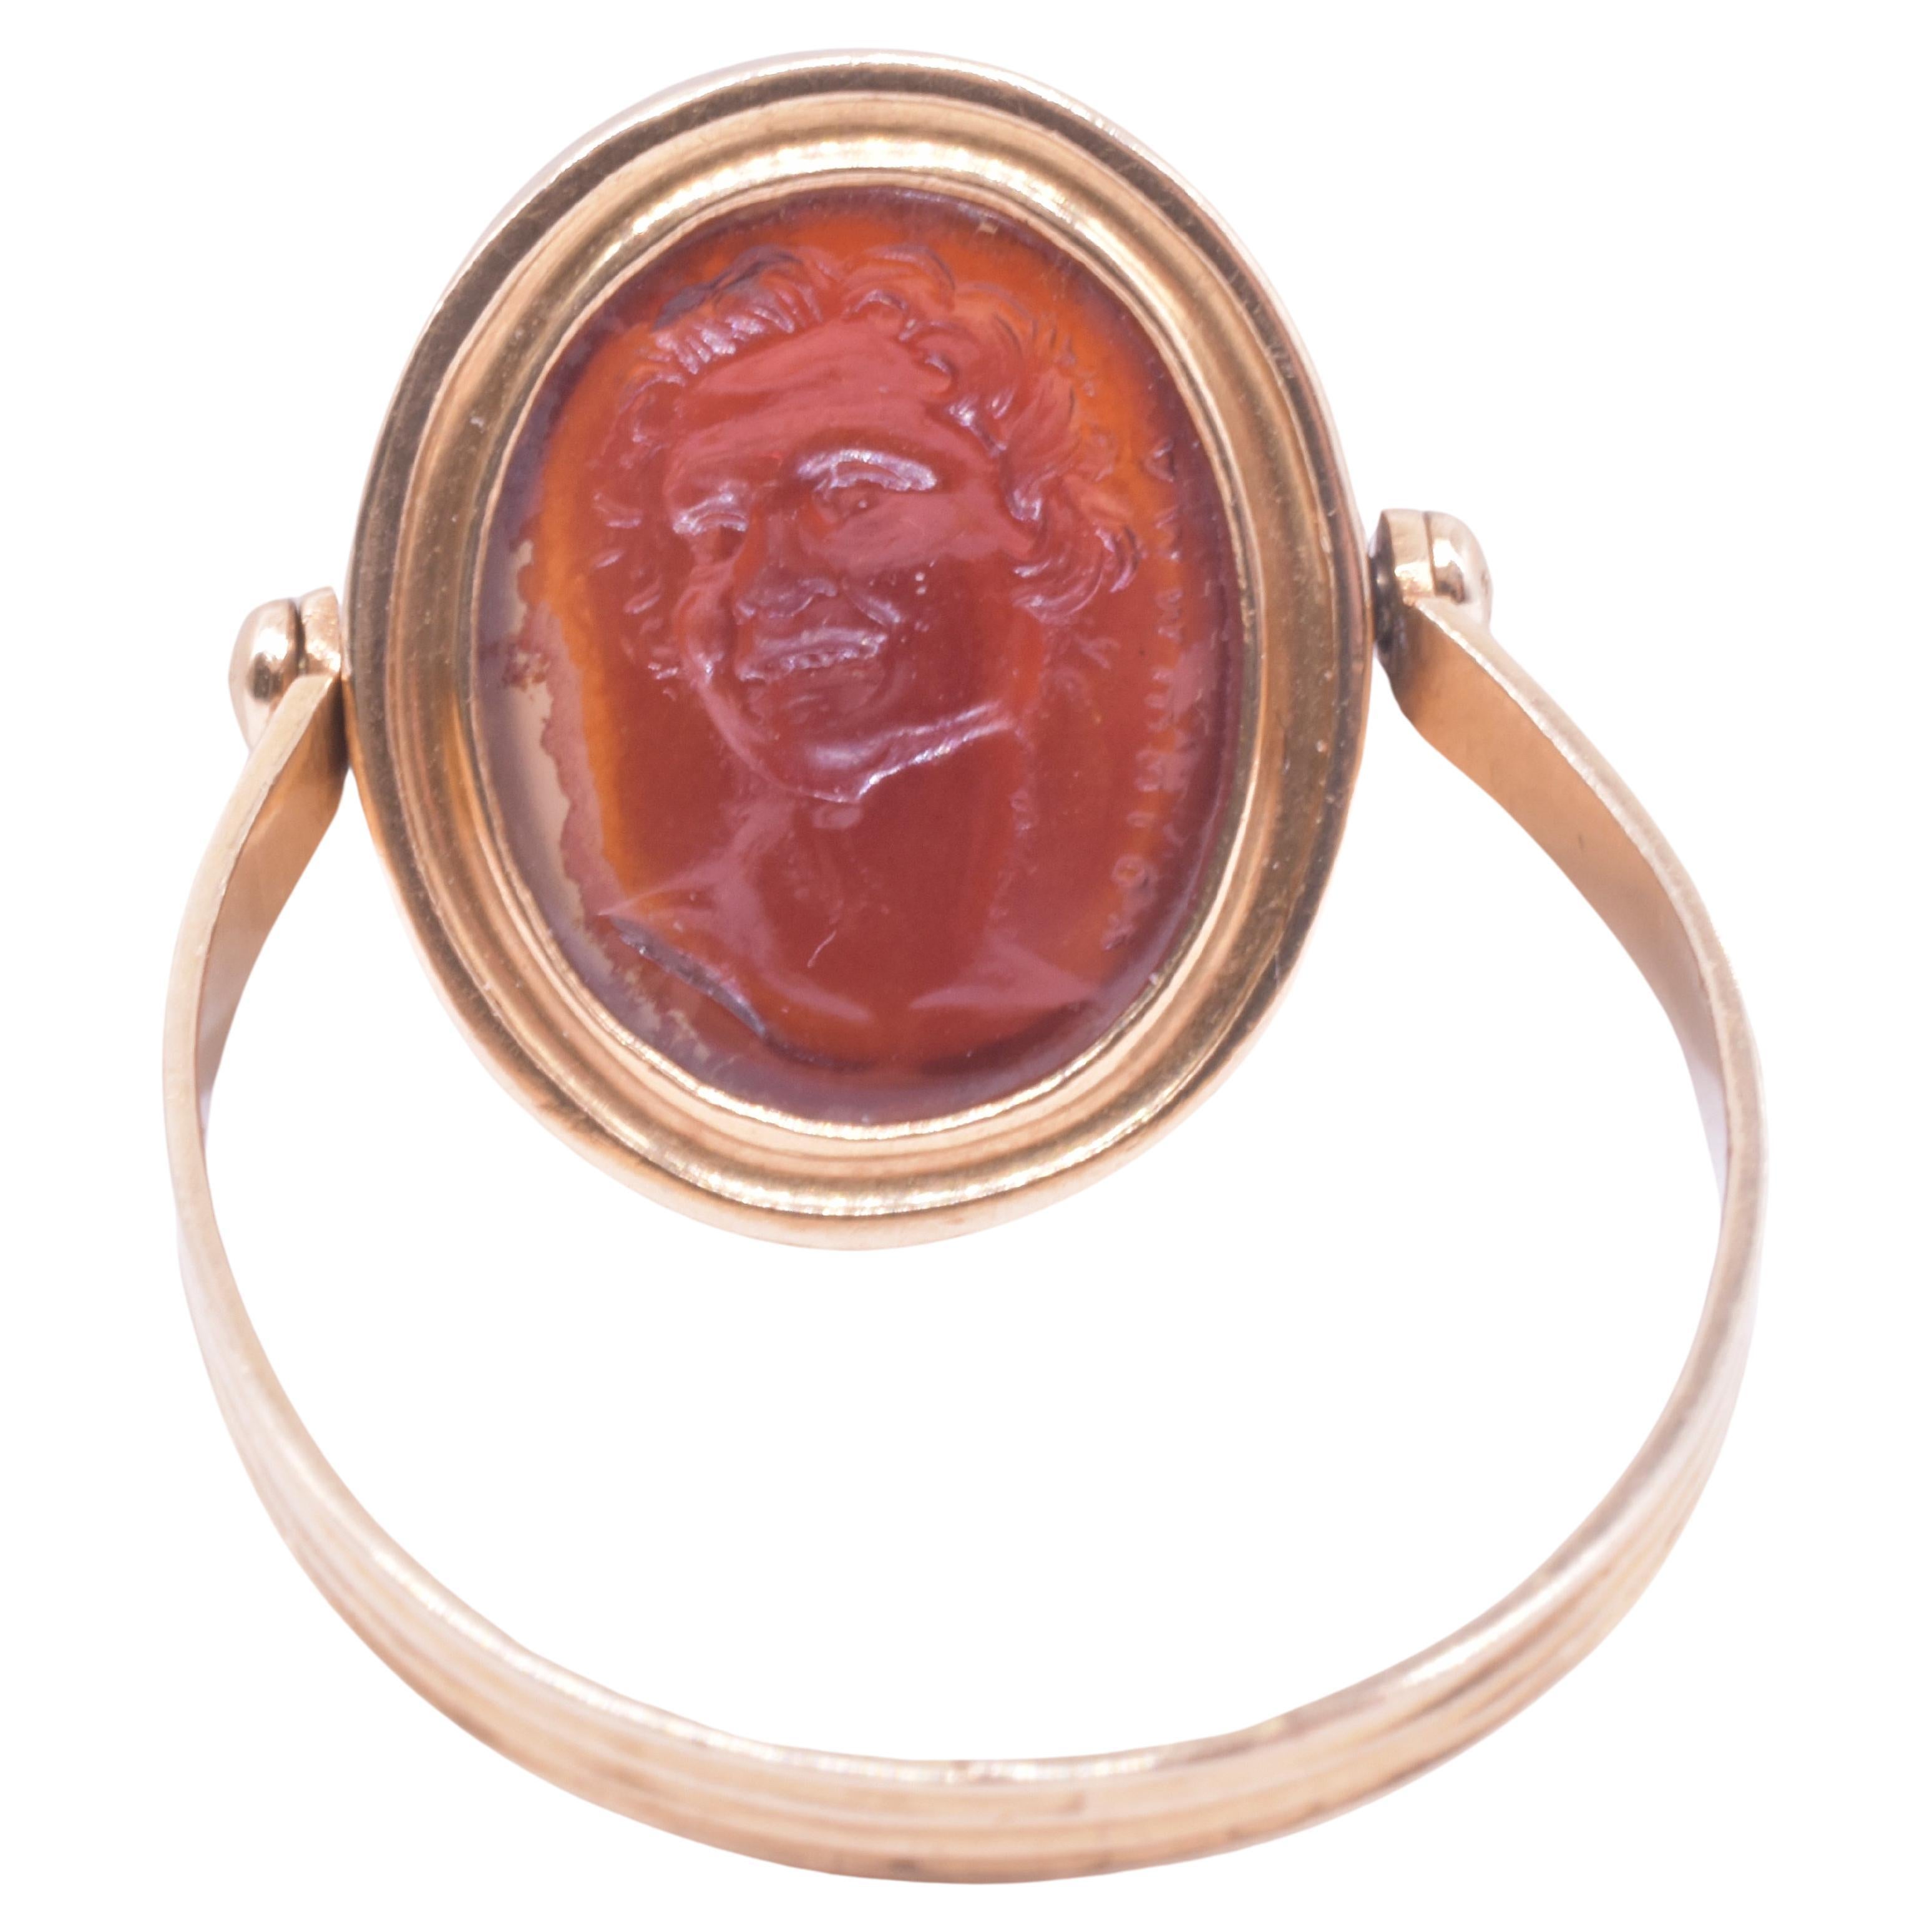 Our C1790 ring is an 18th century glass intaglio  of an ancient signed gem depicting the head of a laughing satyr, or faun (a young satyr). Such carvings were called Tassies (explained further down). 